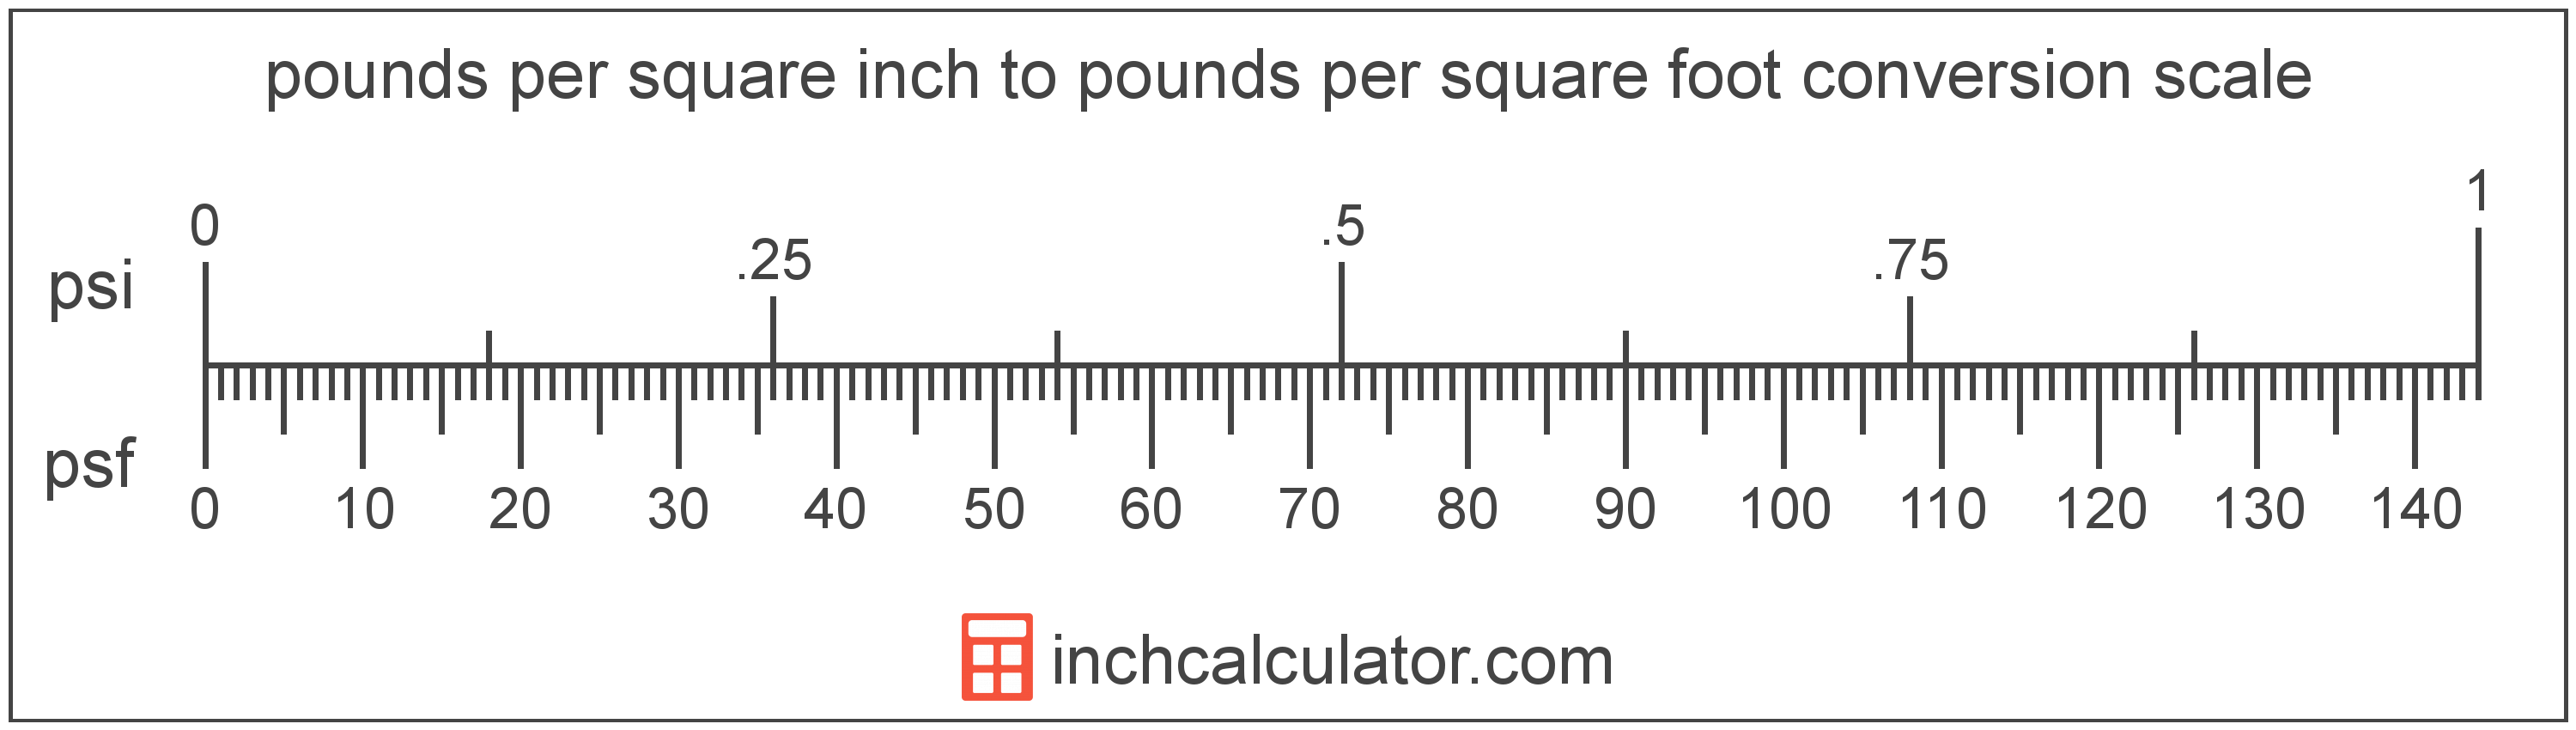 conversion scale showing pounds per square foot and equivalent pounds per square inch pressure values